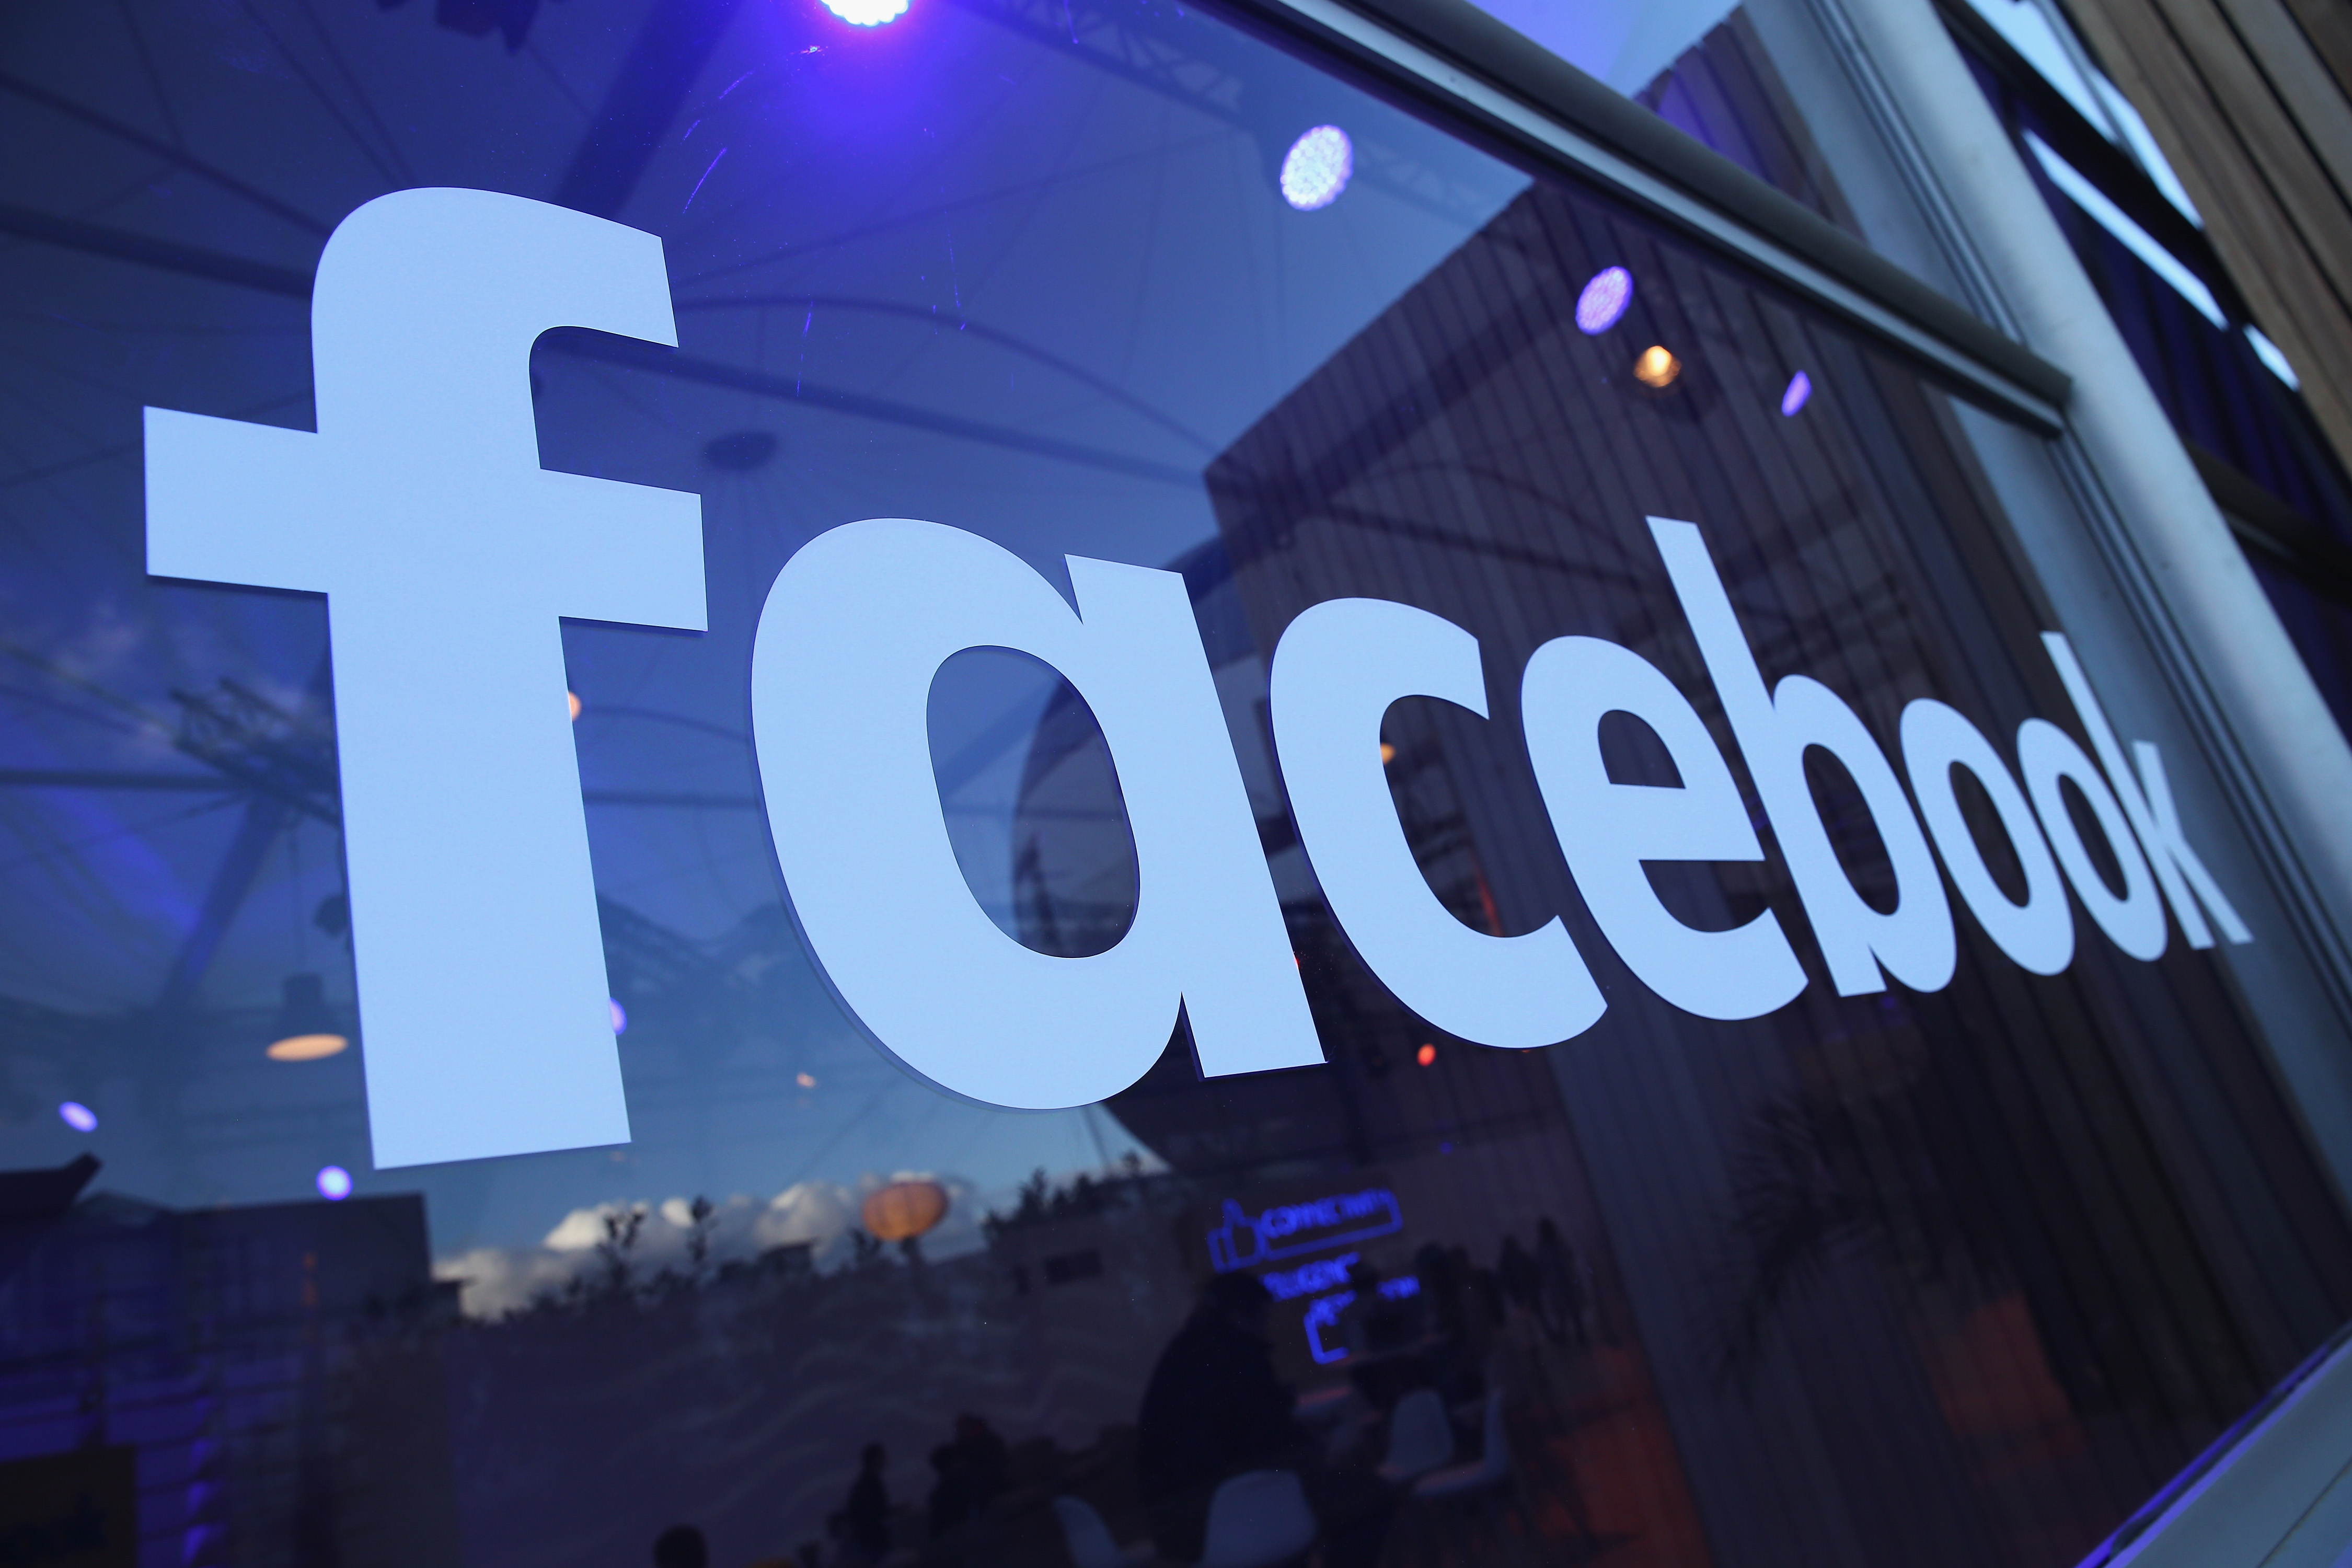 facebook tests news feed controls that let people see less from groups and pages | techcrunch